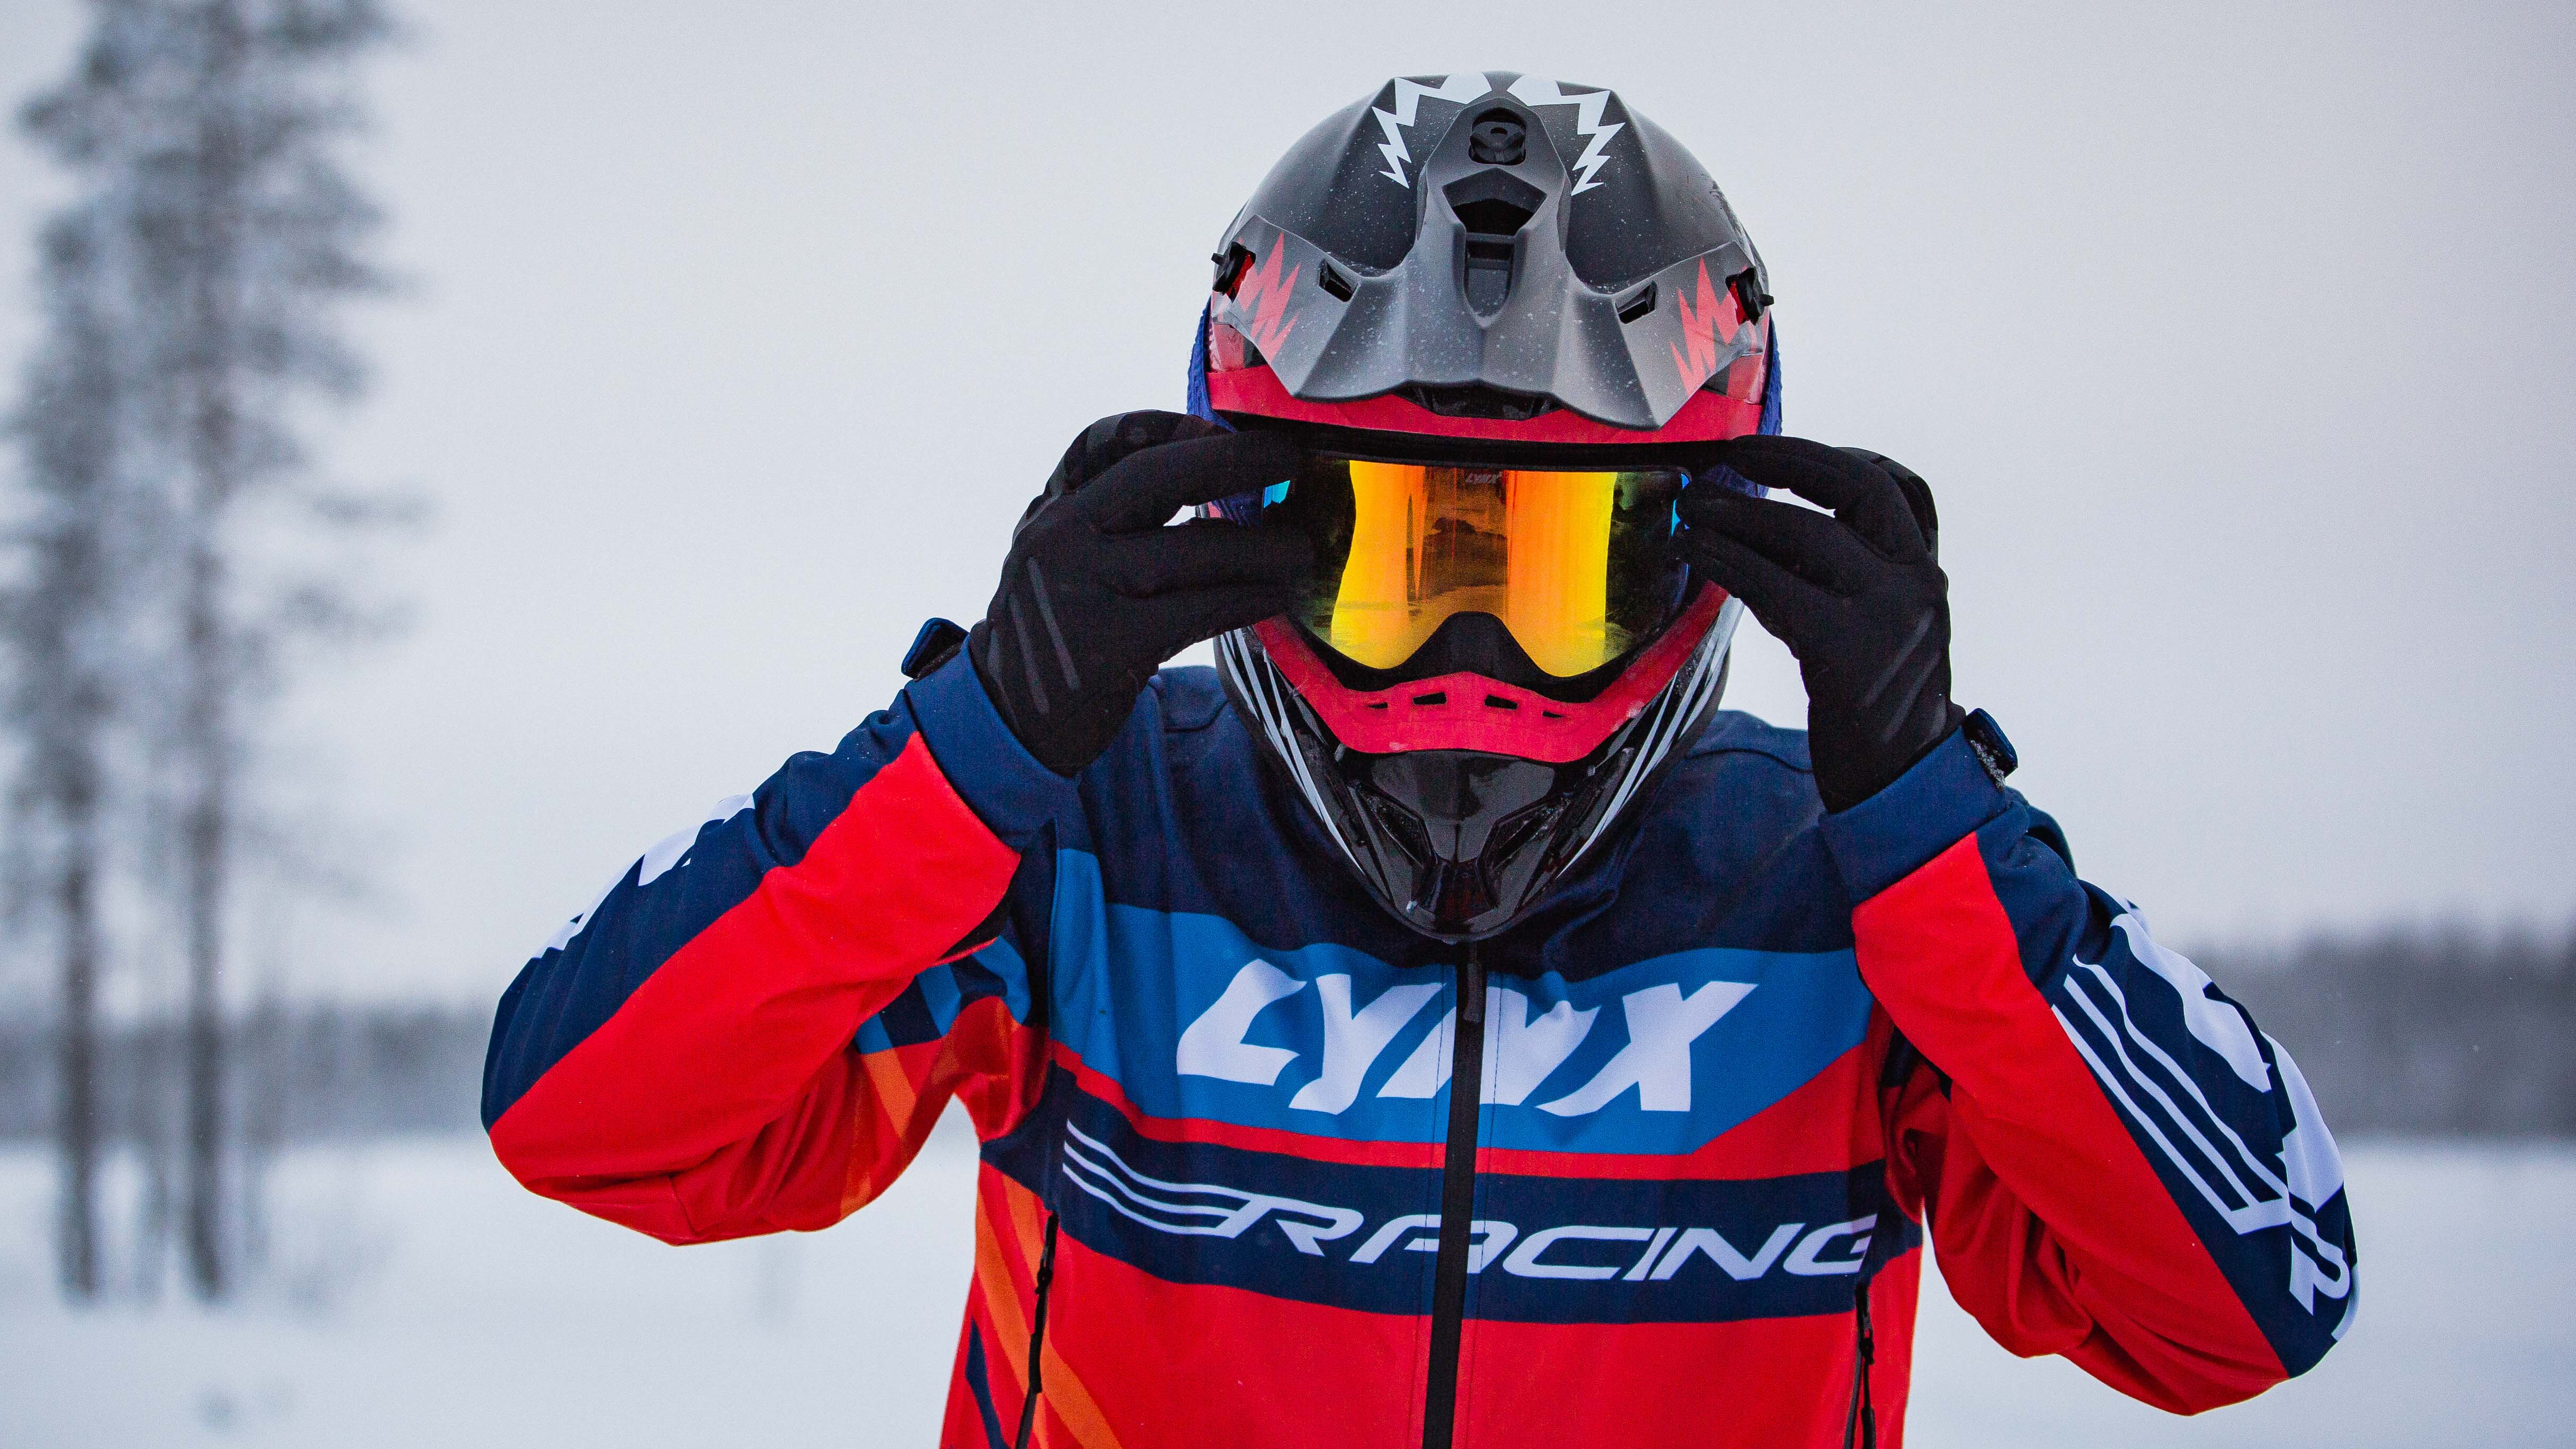 Lynx Racing rider putting goggles on